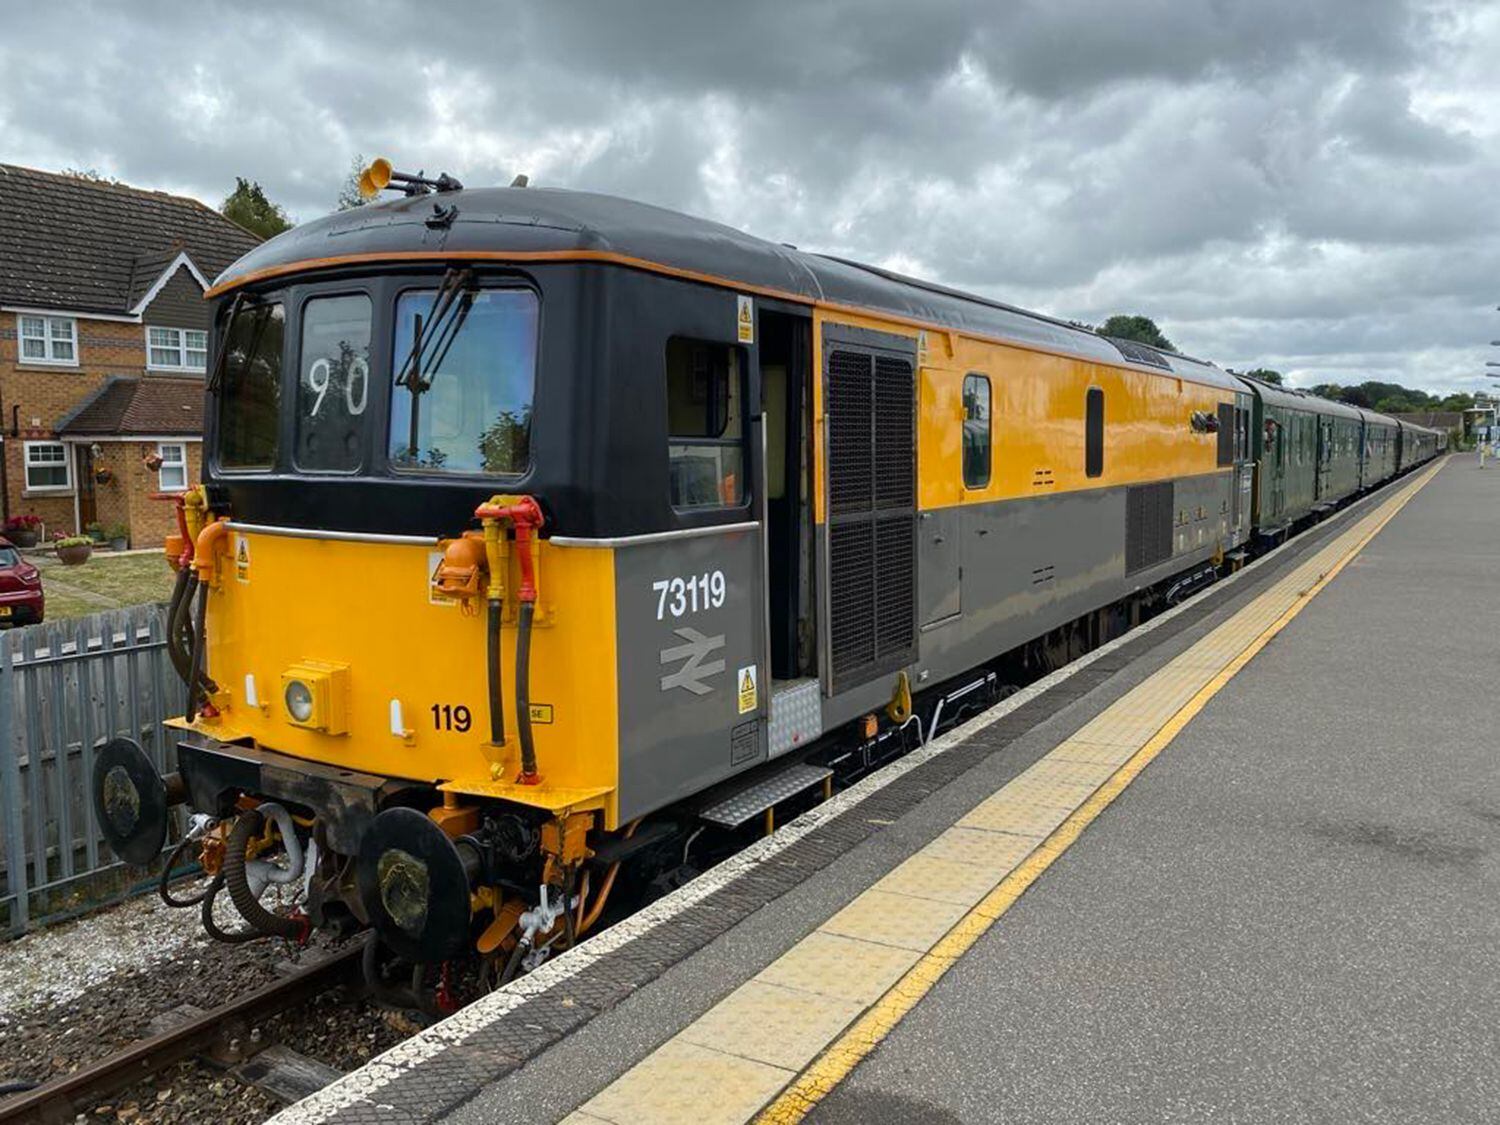 Loco with touching connection to Severn Valley Railway to visit for festival